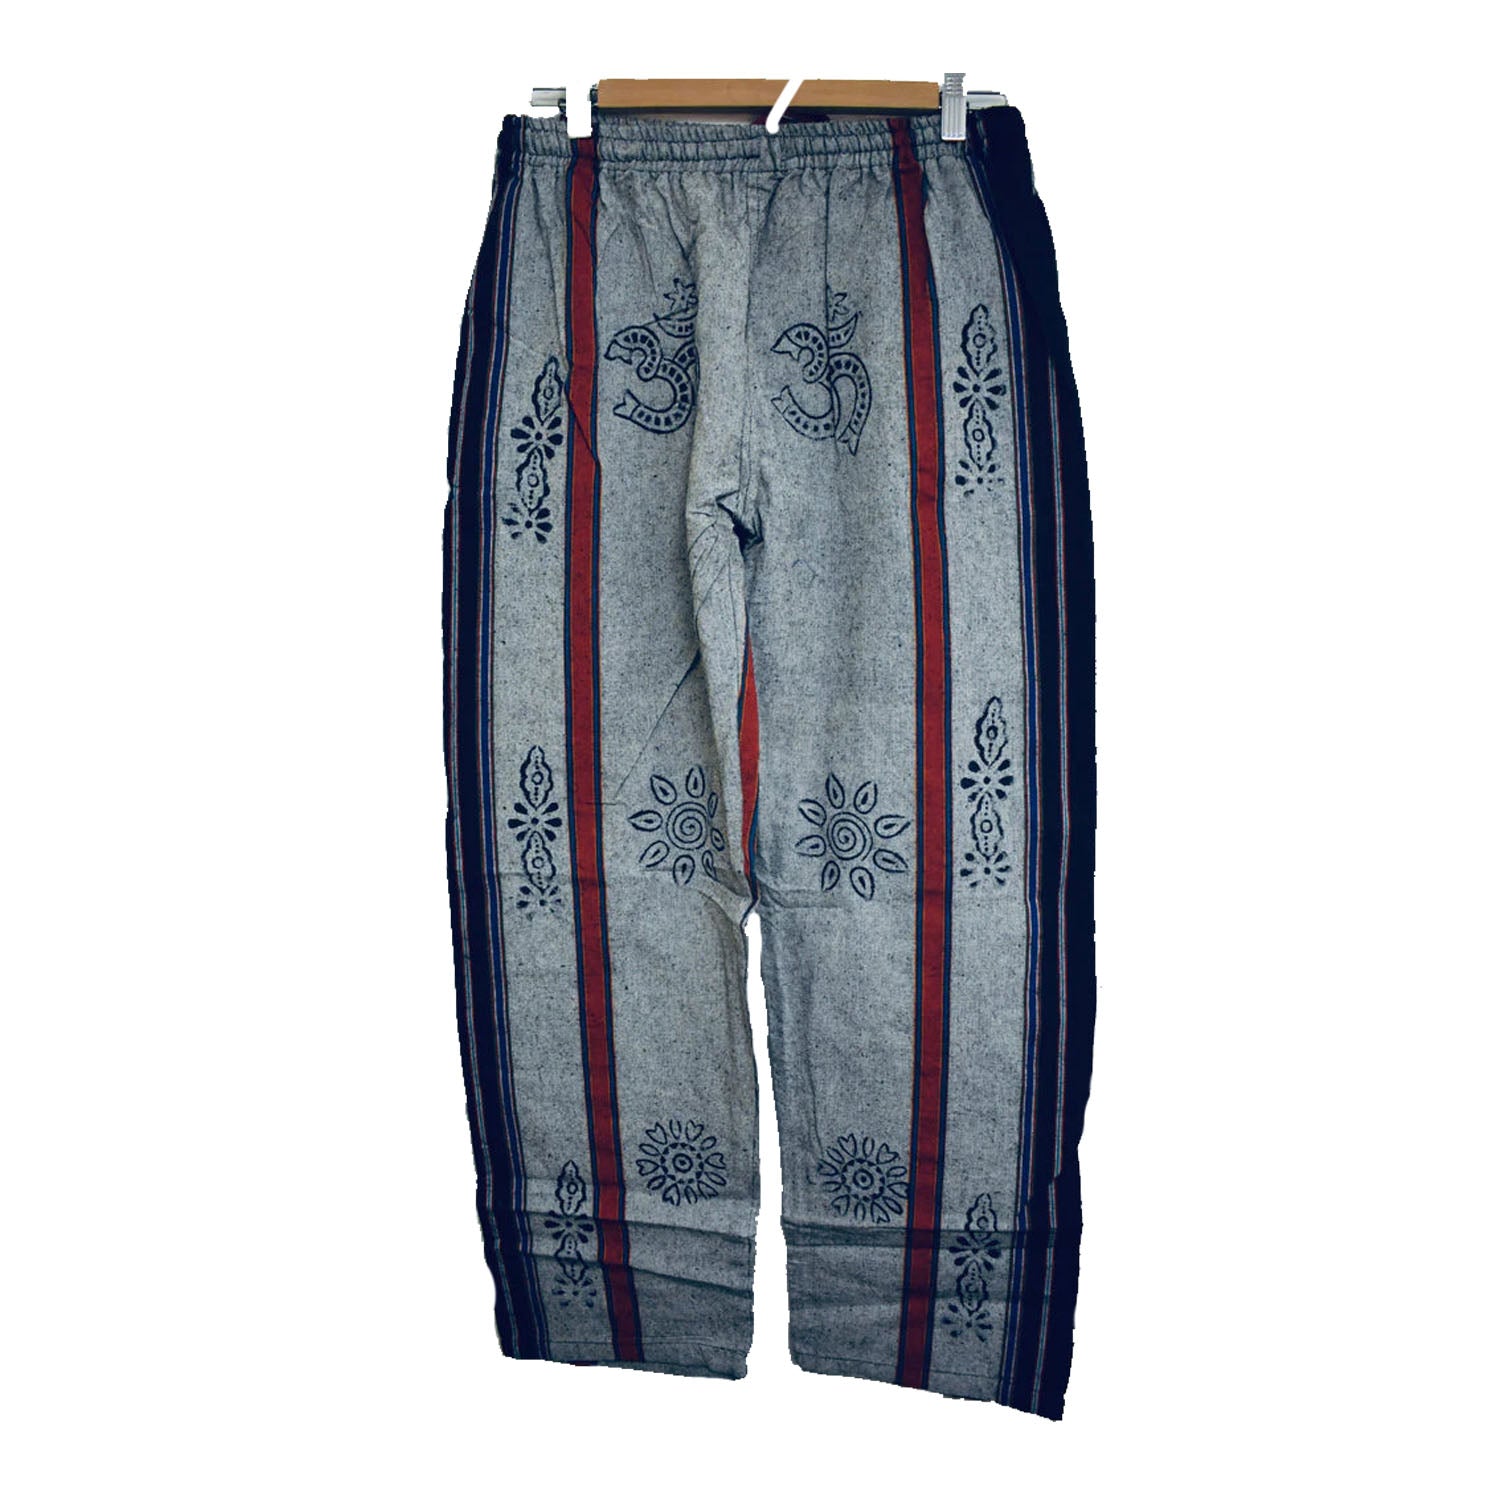 Mens Trousers & Shorts